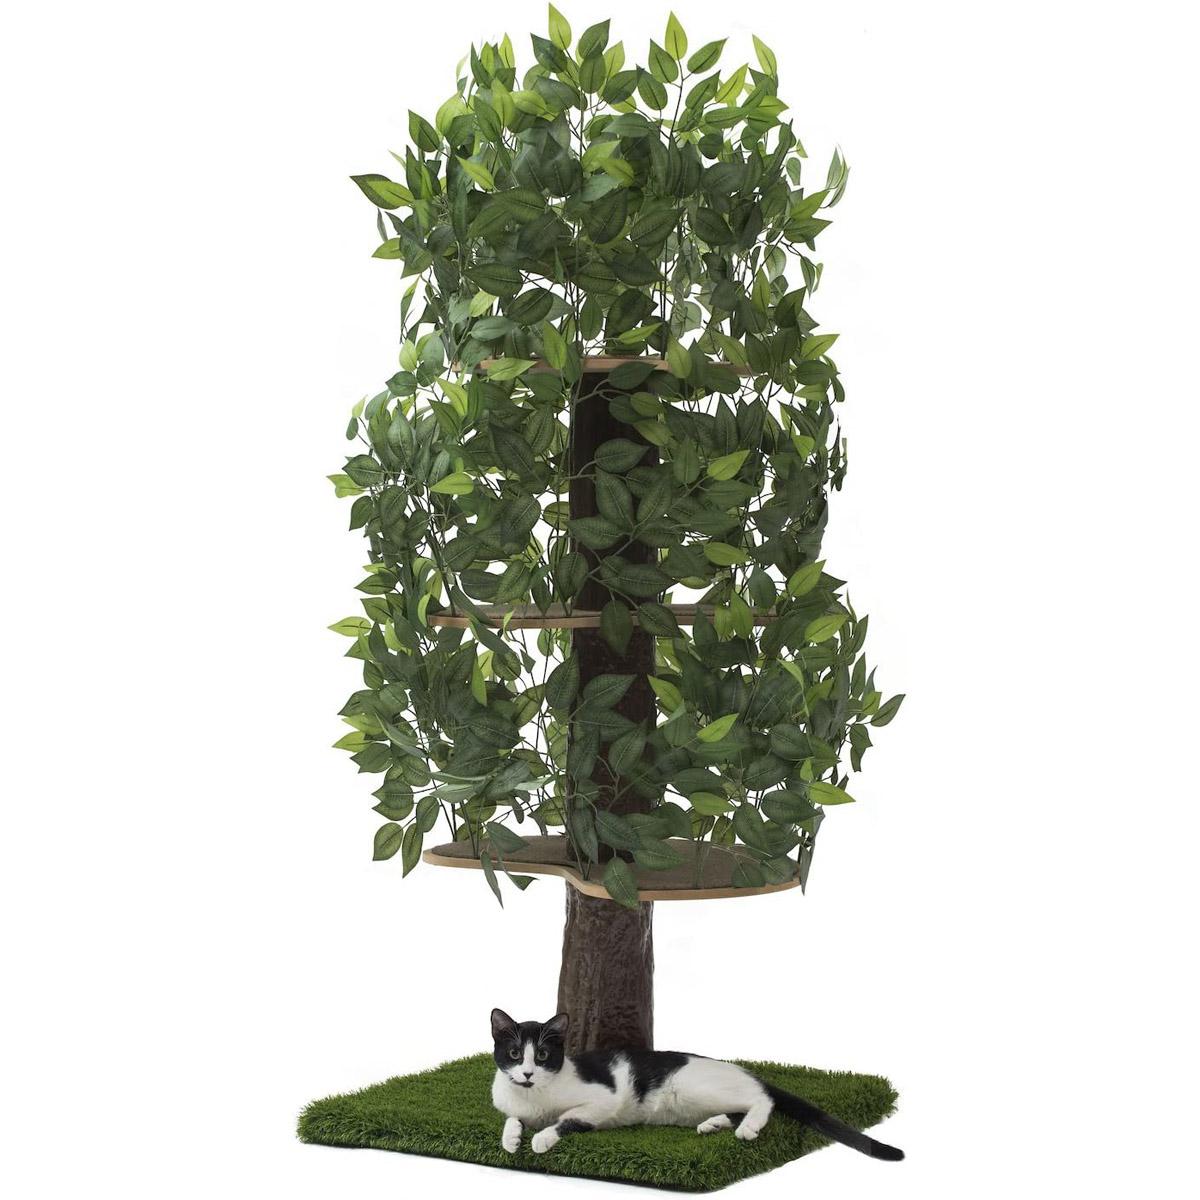 On2 Pets 60in Tall Cat Tree with Leaves for $94.47 Shipped